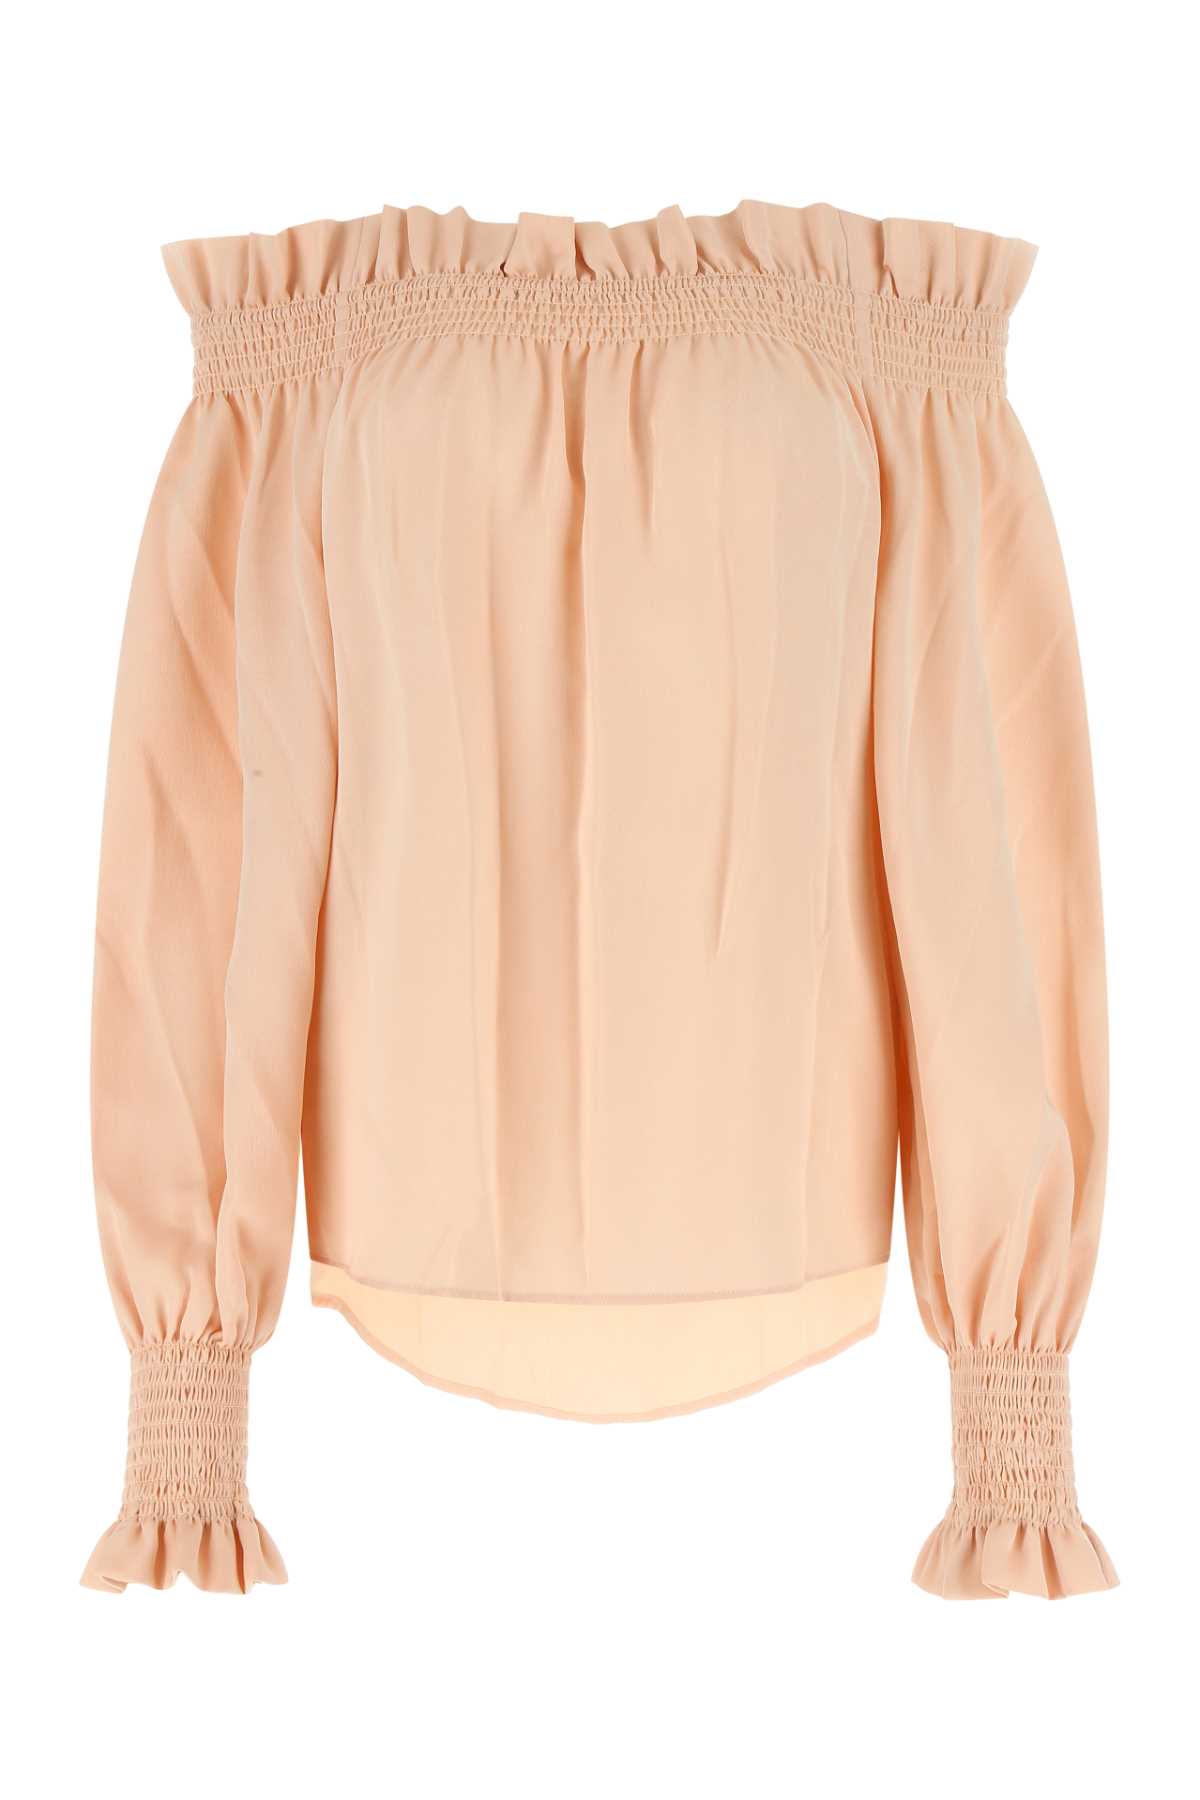 See by Chloé Light Pink Satin Blouse